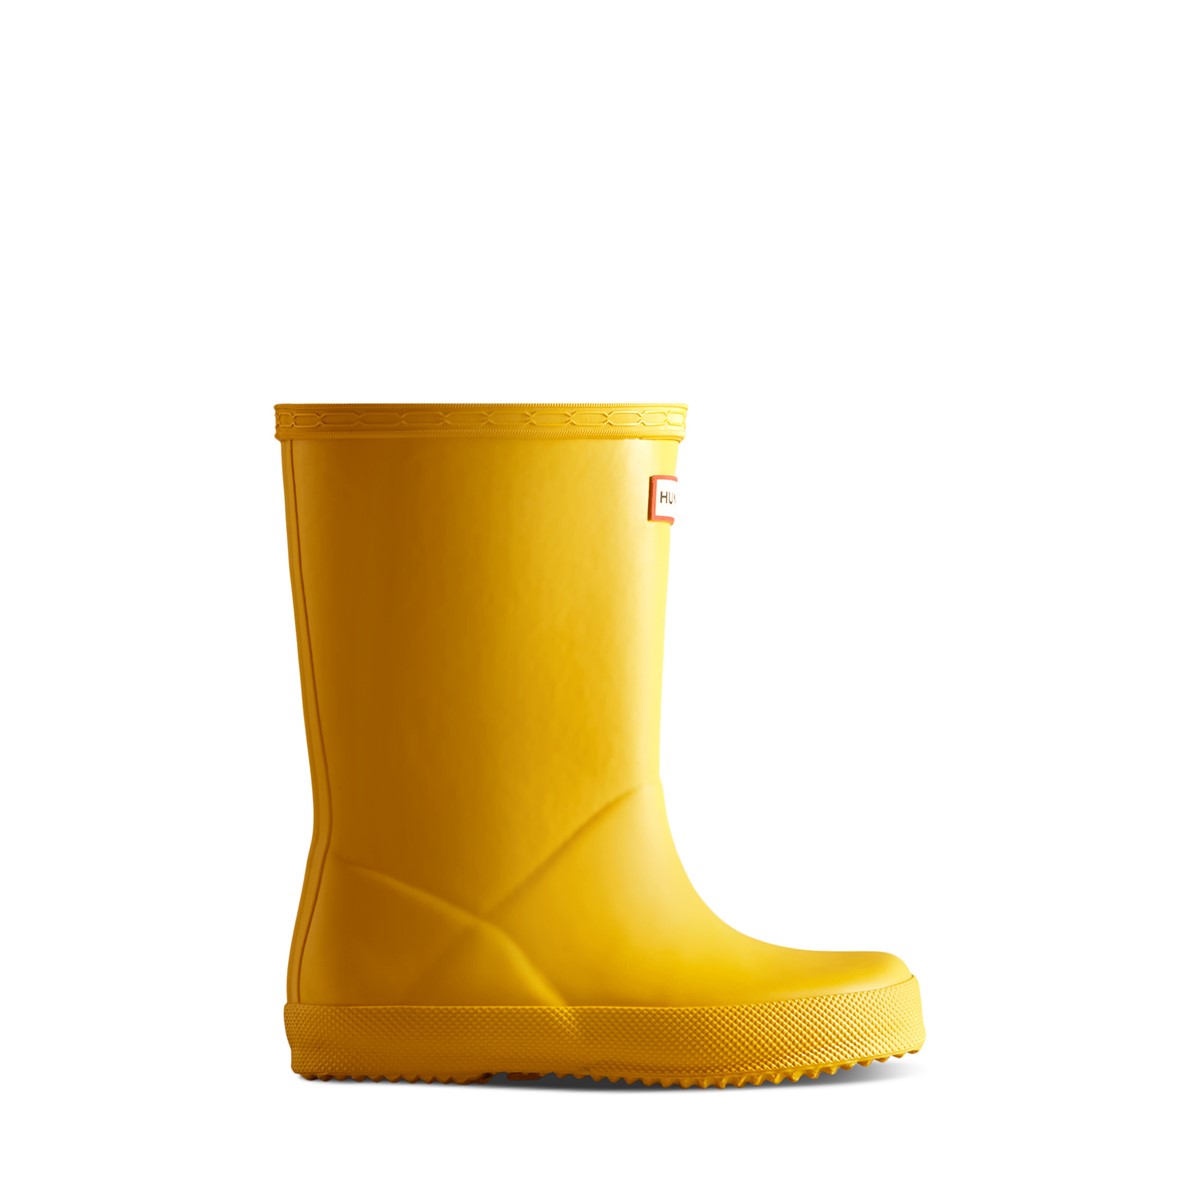 Toddler's First Classic Rain Boots in Yellow